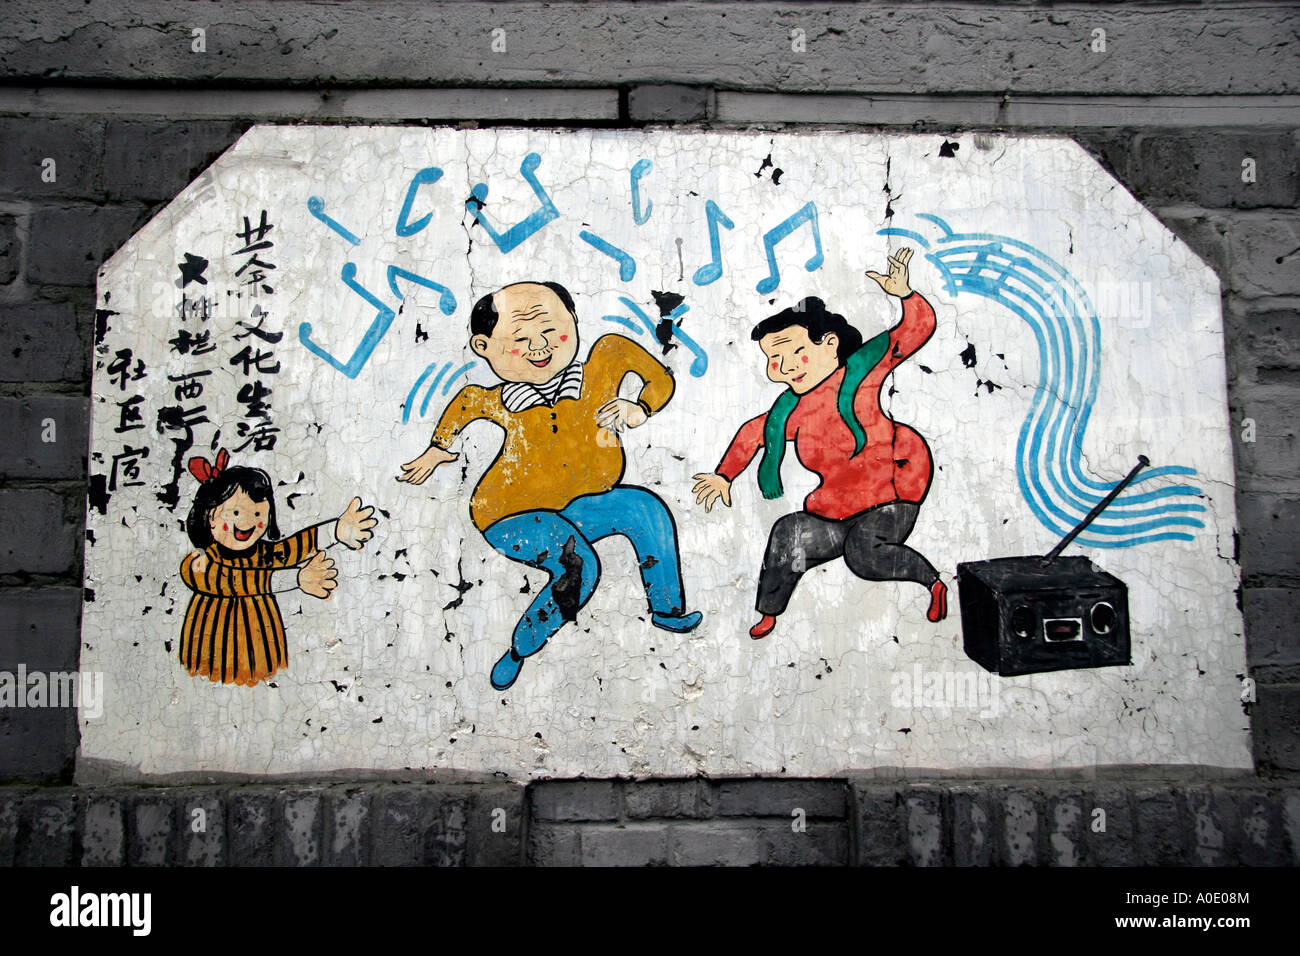 Naive wall painting depicting people dancing to music from a radio